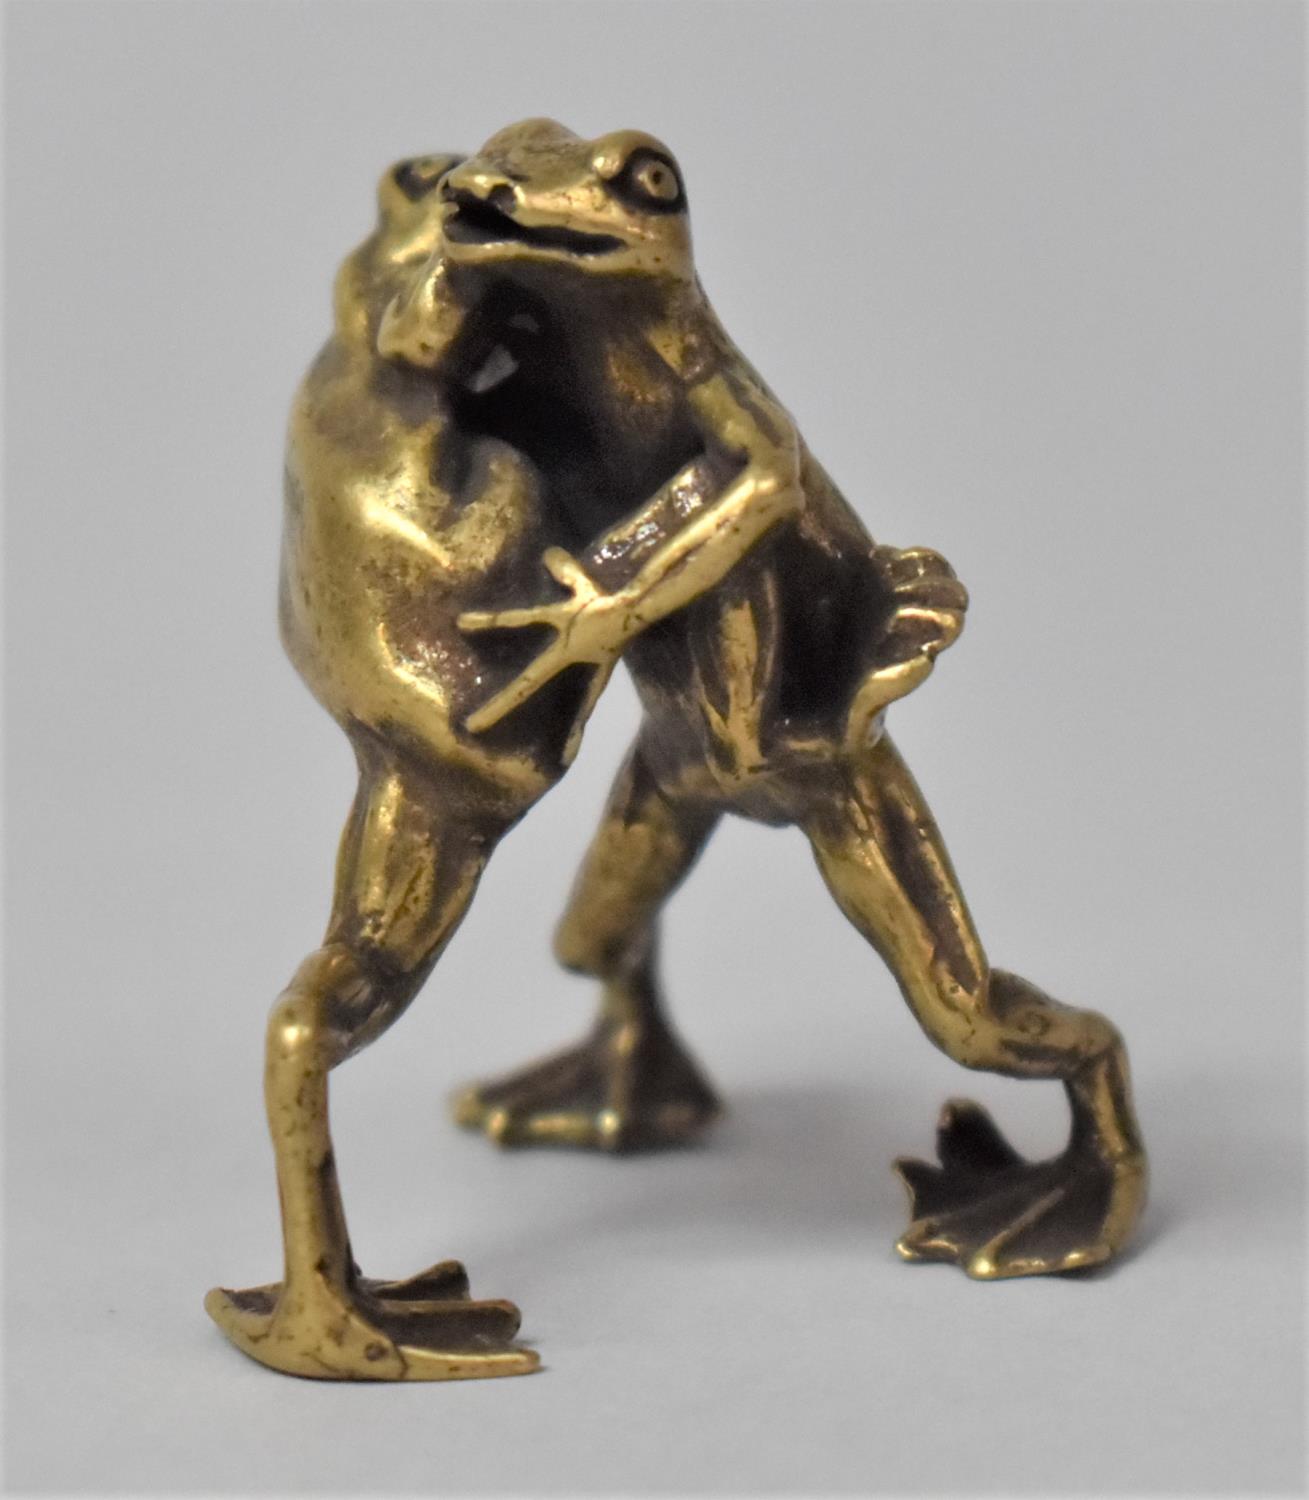 A Small Bronze Study of Two Frogs Fighting, 4cm high - Image 2 of 5